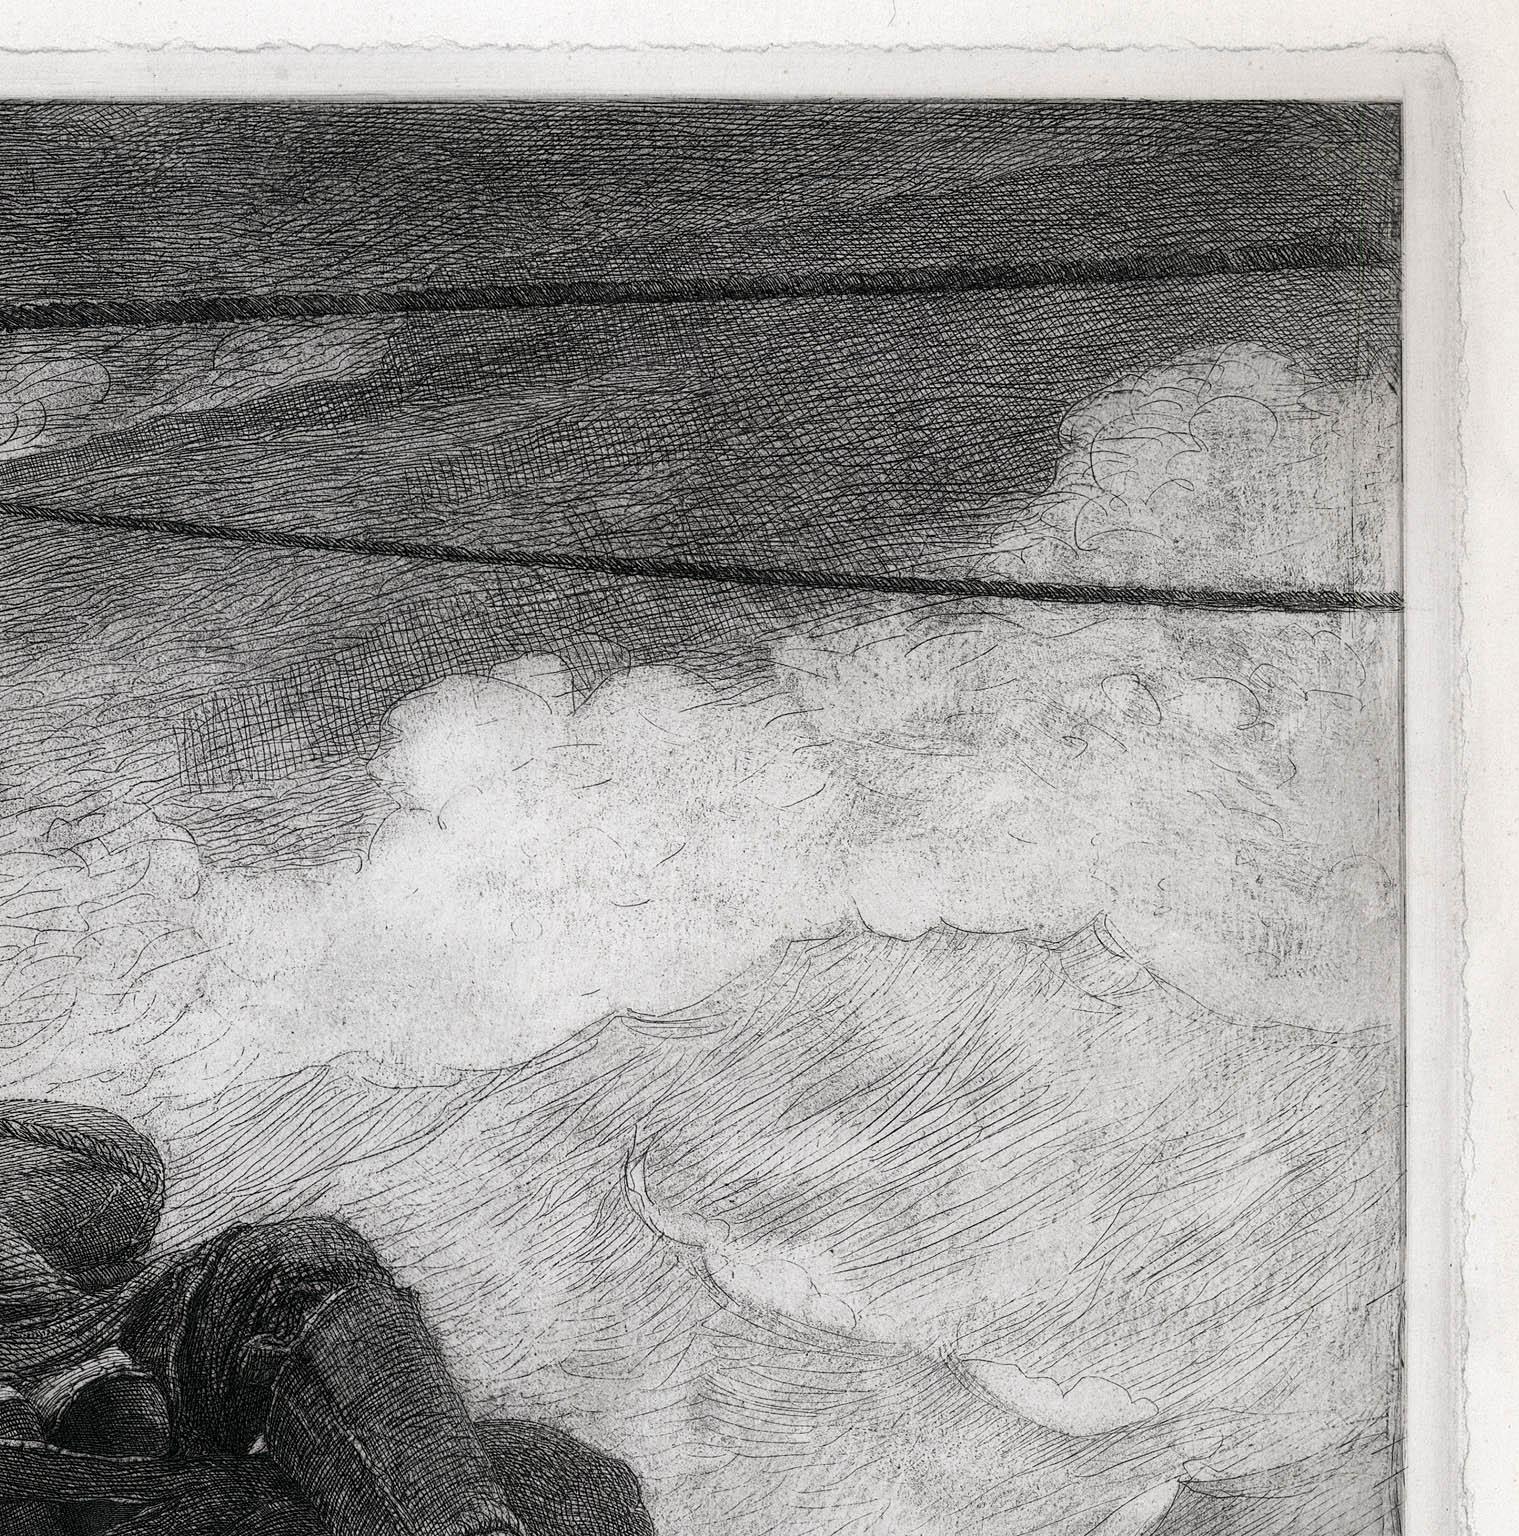 Winslow Homer created the etching entitled “THE LIFE LINE” in 1884.  This is an unsigned impression published in 1887 by “C. Klackner, 17 East 17th St., New York.”  There is an etched Remarque in the lower right of an anchor between two dials. 